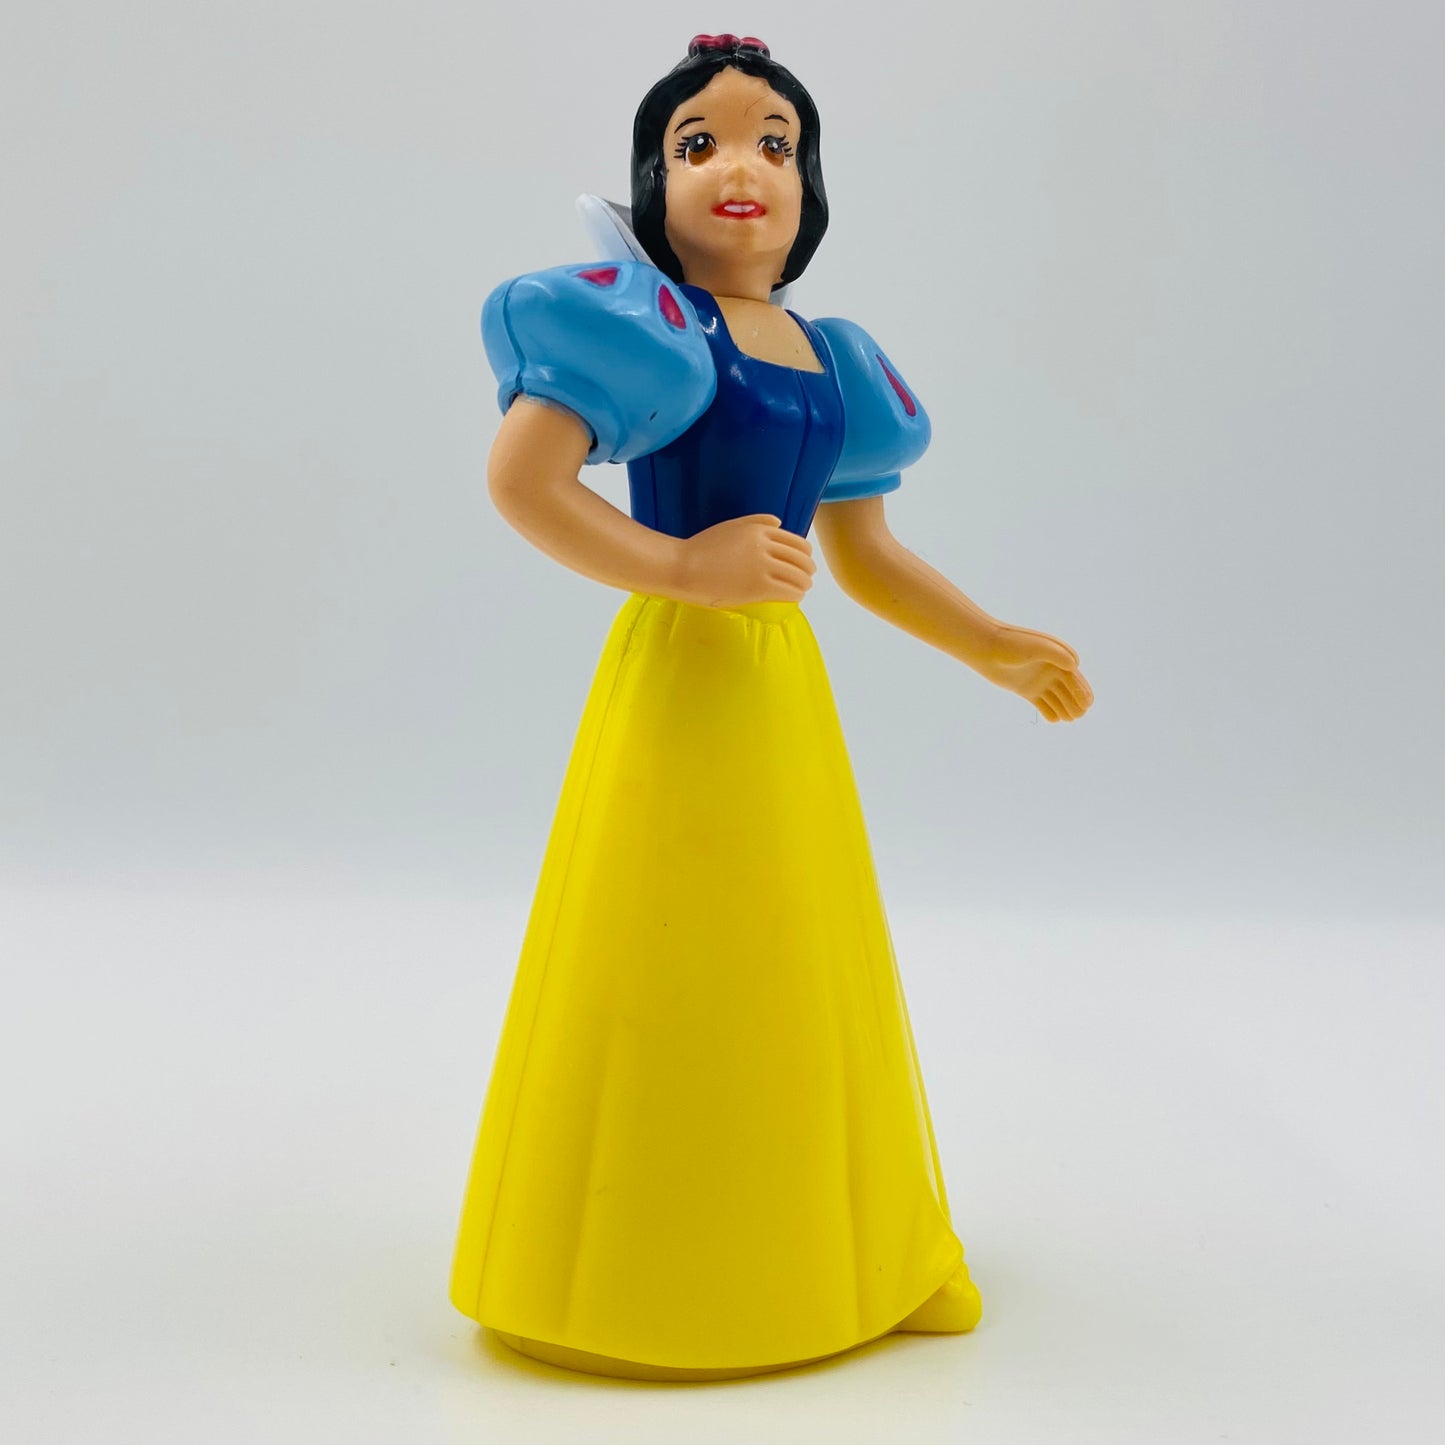 Snow White and the Seven Dwarfs Snow White McDonald's Happy Meal toy (1992) loose